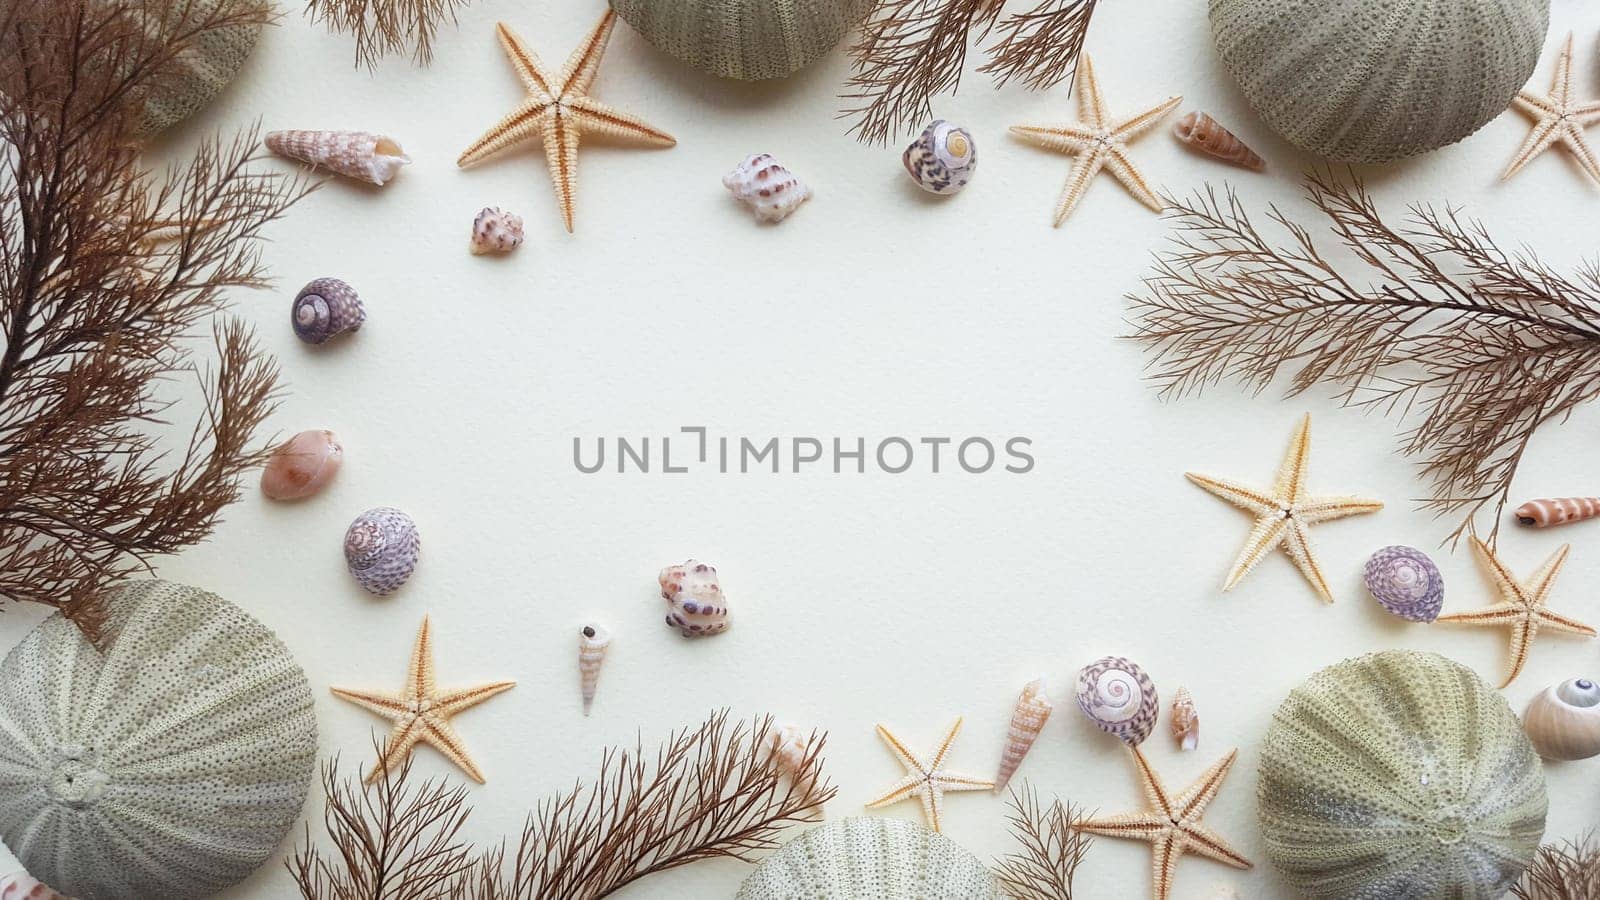 organism,nature,textile,botany,leaf,natural,material,branch,christmas,ornament,wood,blue,fir,snowflake,tree,winter